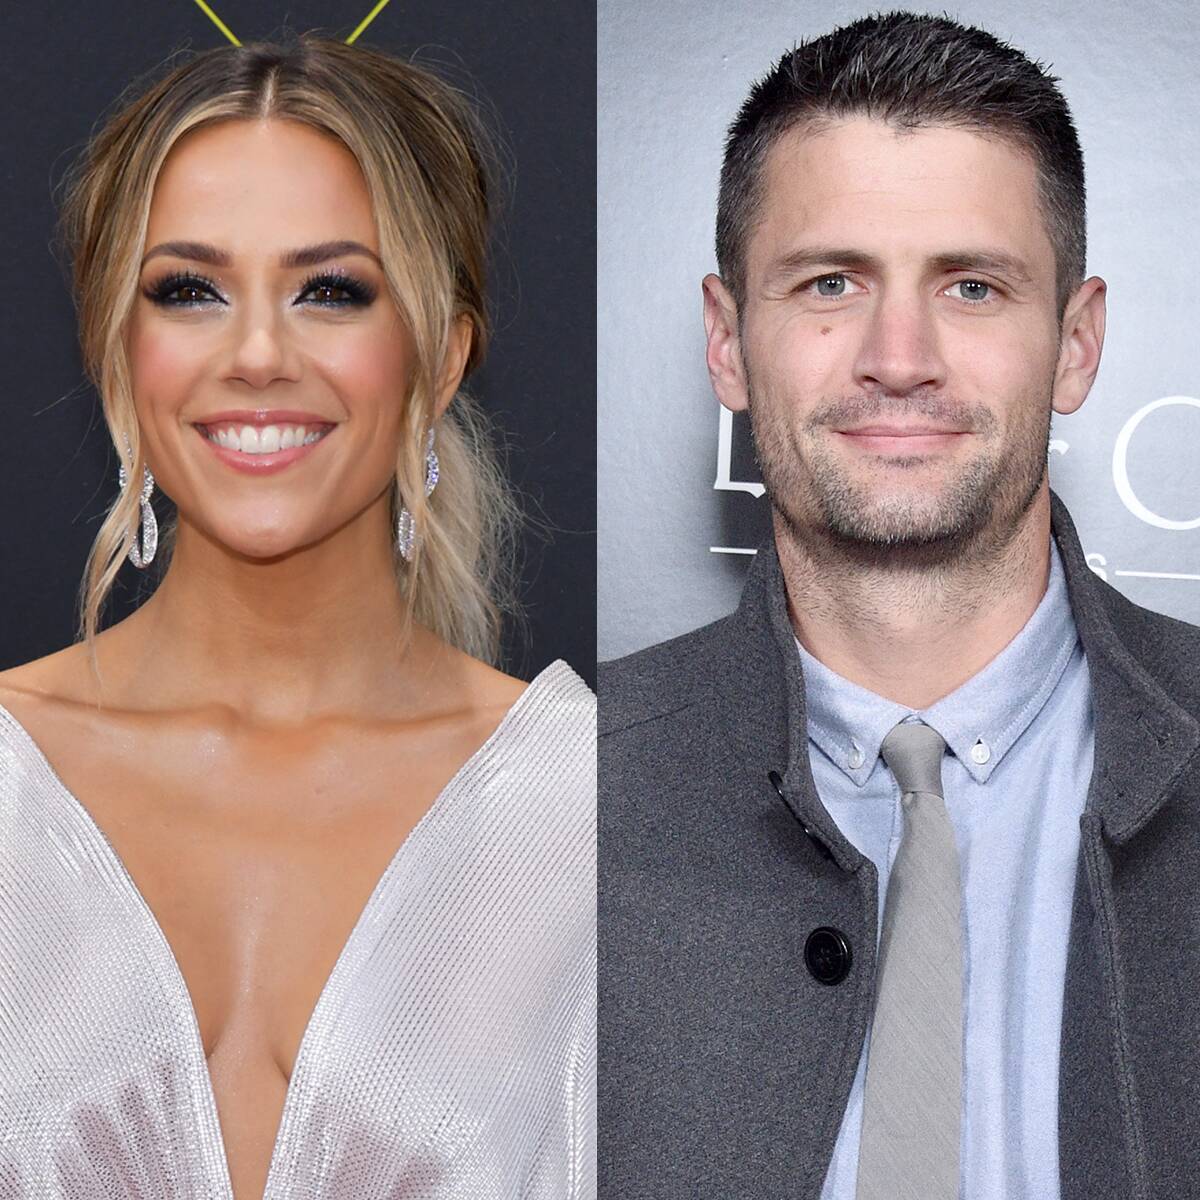 Jana Kramer Recalls One Tree Hill Drama That Prevented Her From Being Close With James Lafferty